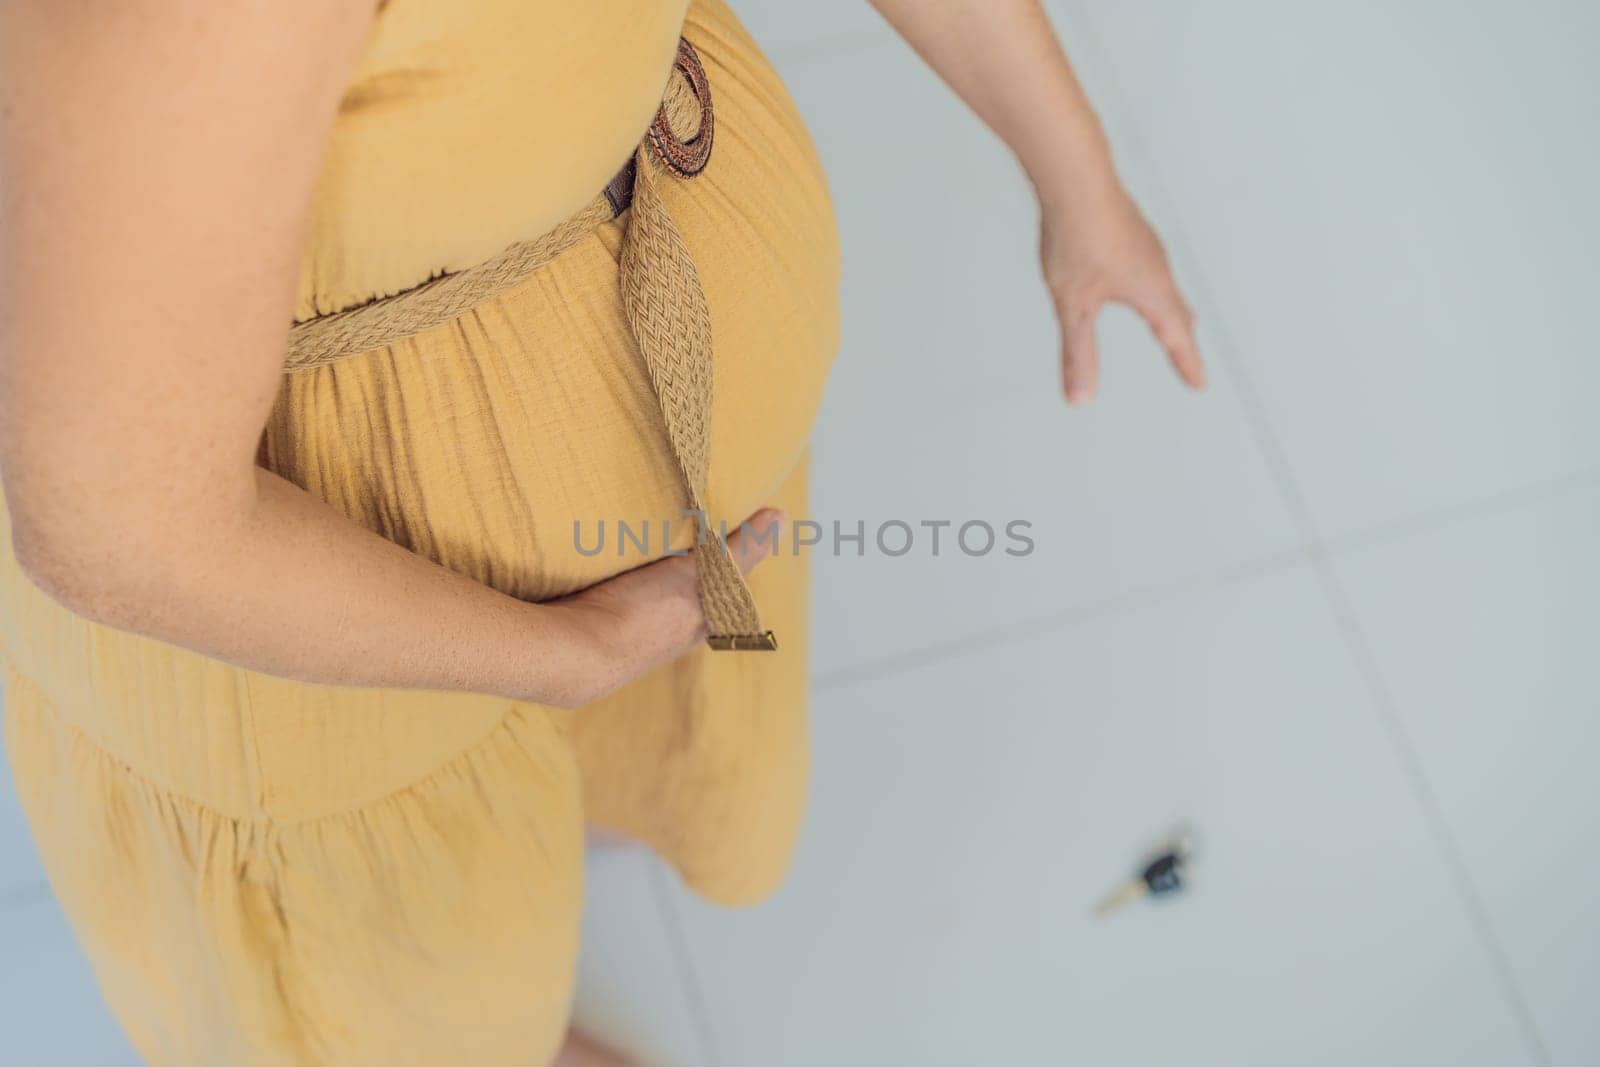 Facing a momentary challenge, a pregnant woman drops her keys and struggles to pick them up, highlighting the physical limitations that can arise during pregnancy. Patience and support become essential by galitskaya